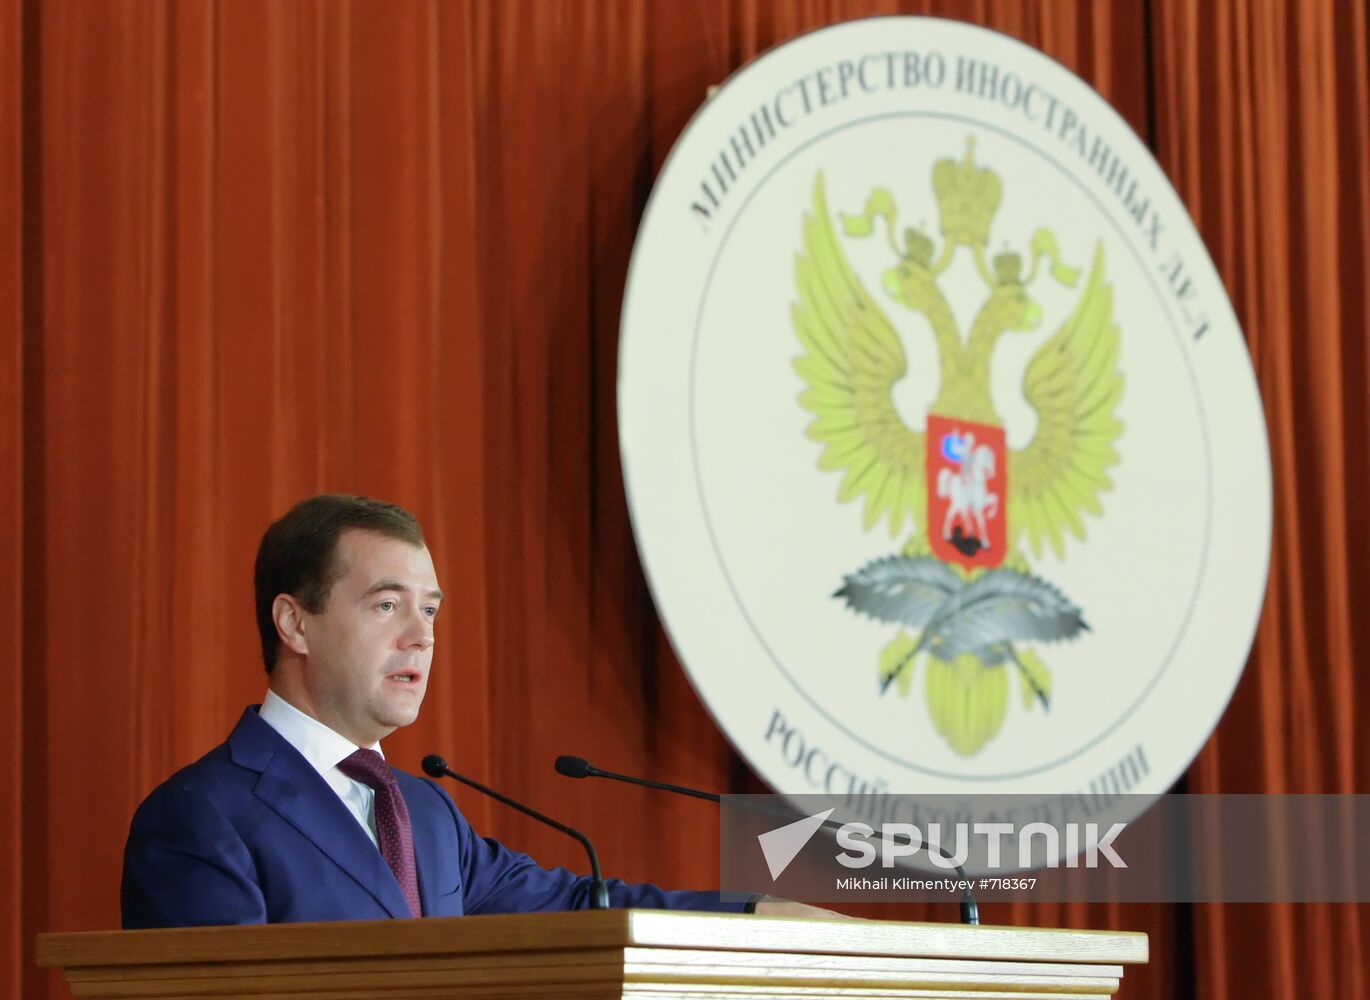 Dmitry Medvedev meets with Russian diplomats